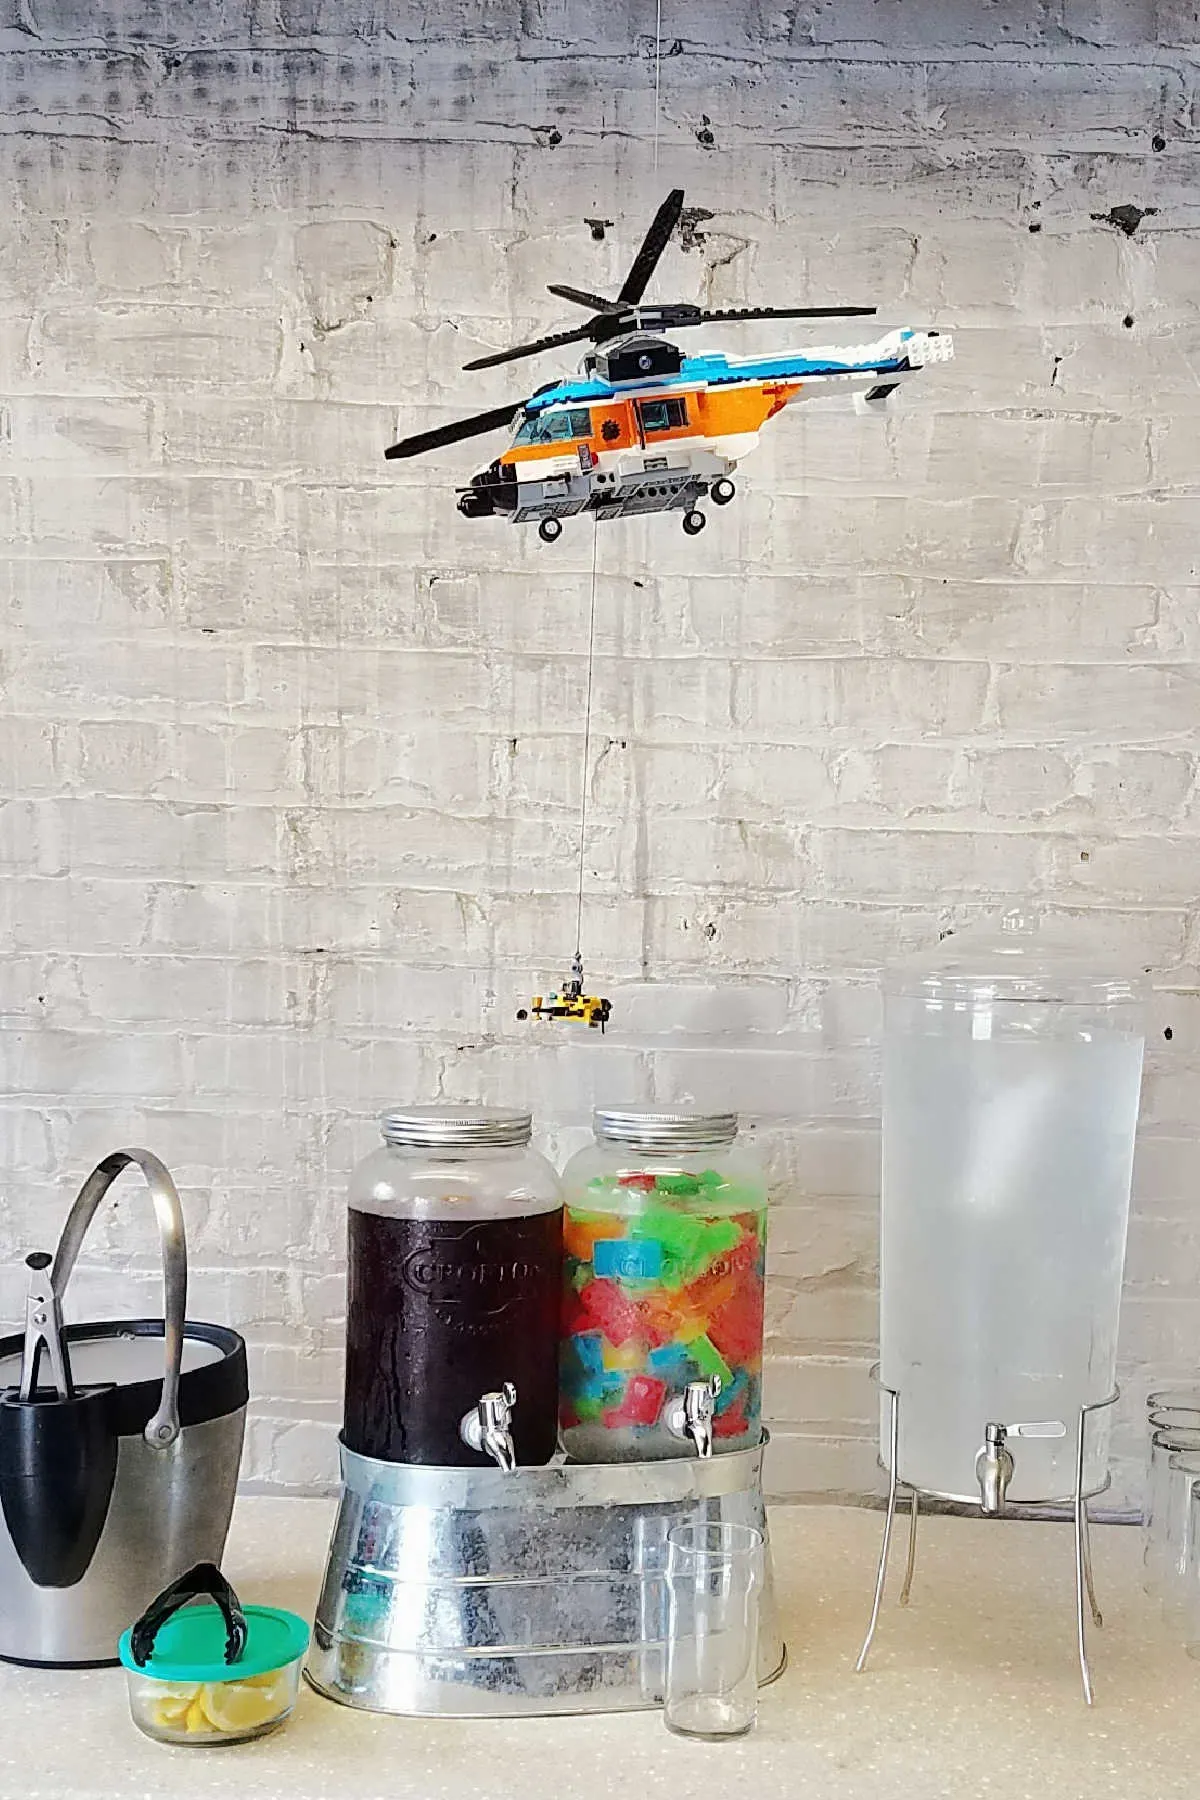 Beverage area with Lego helicopter floating over it.